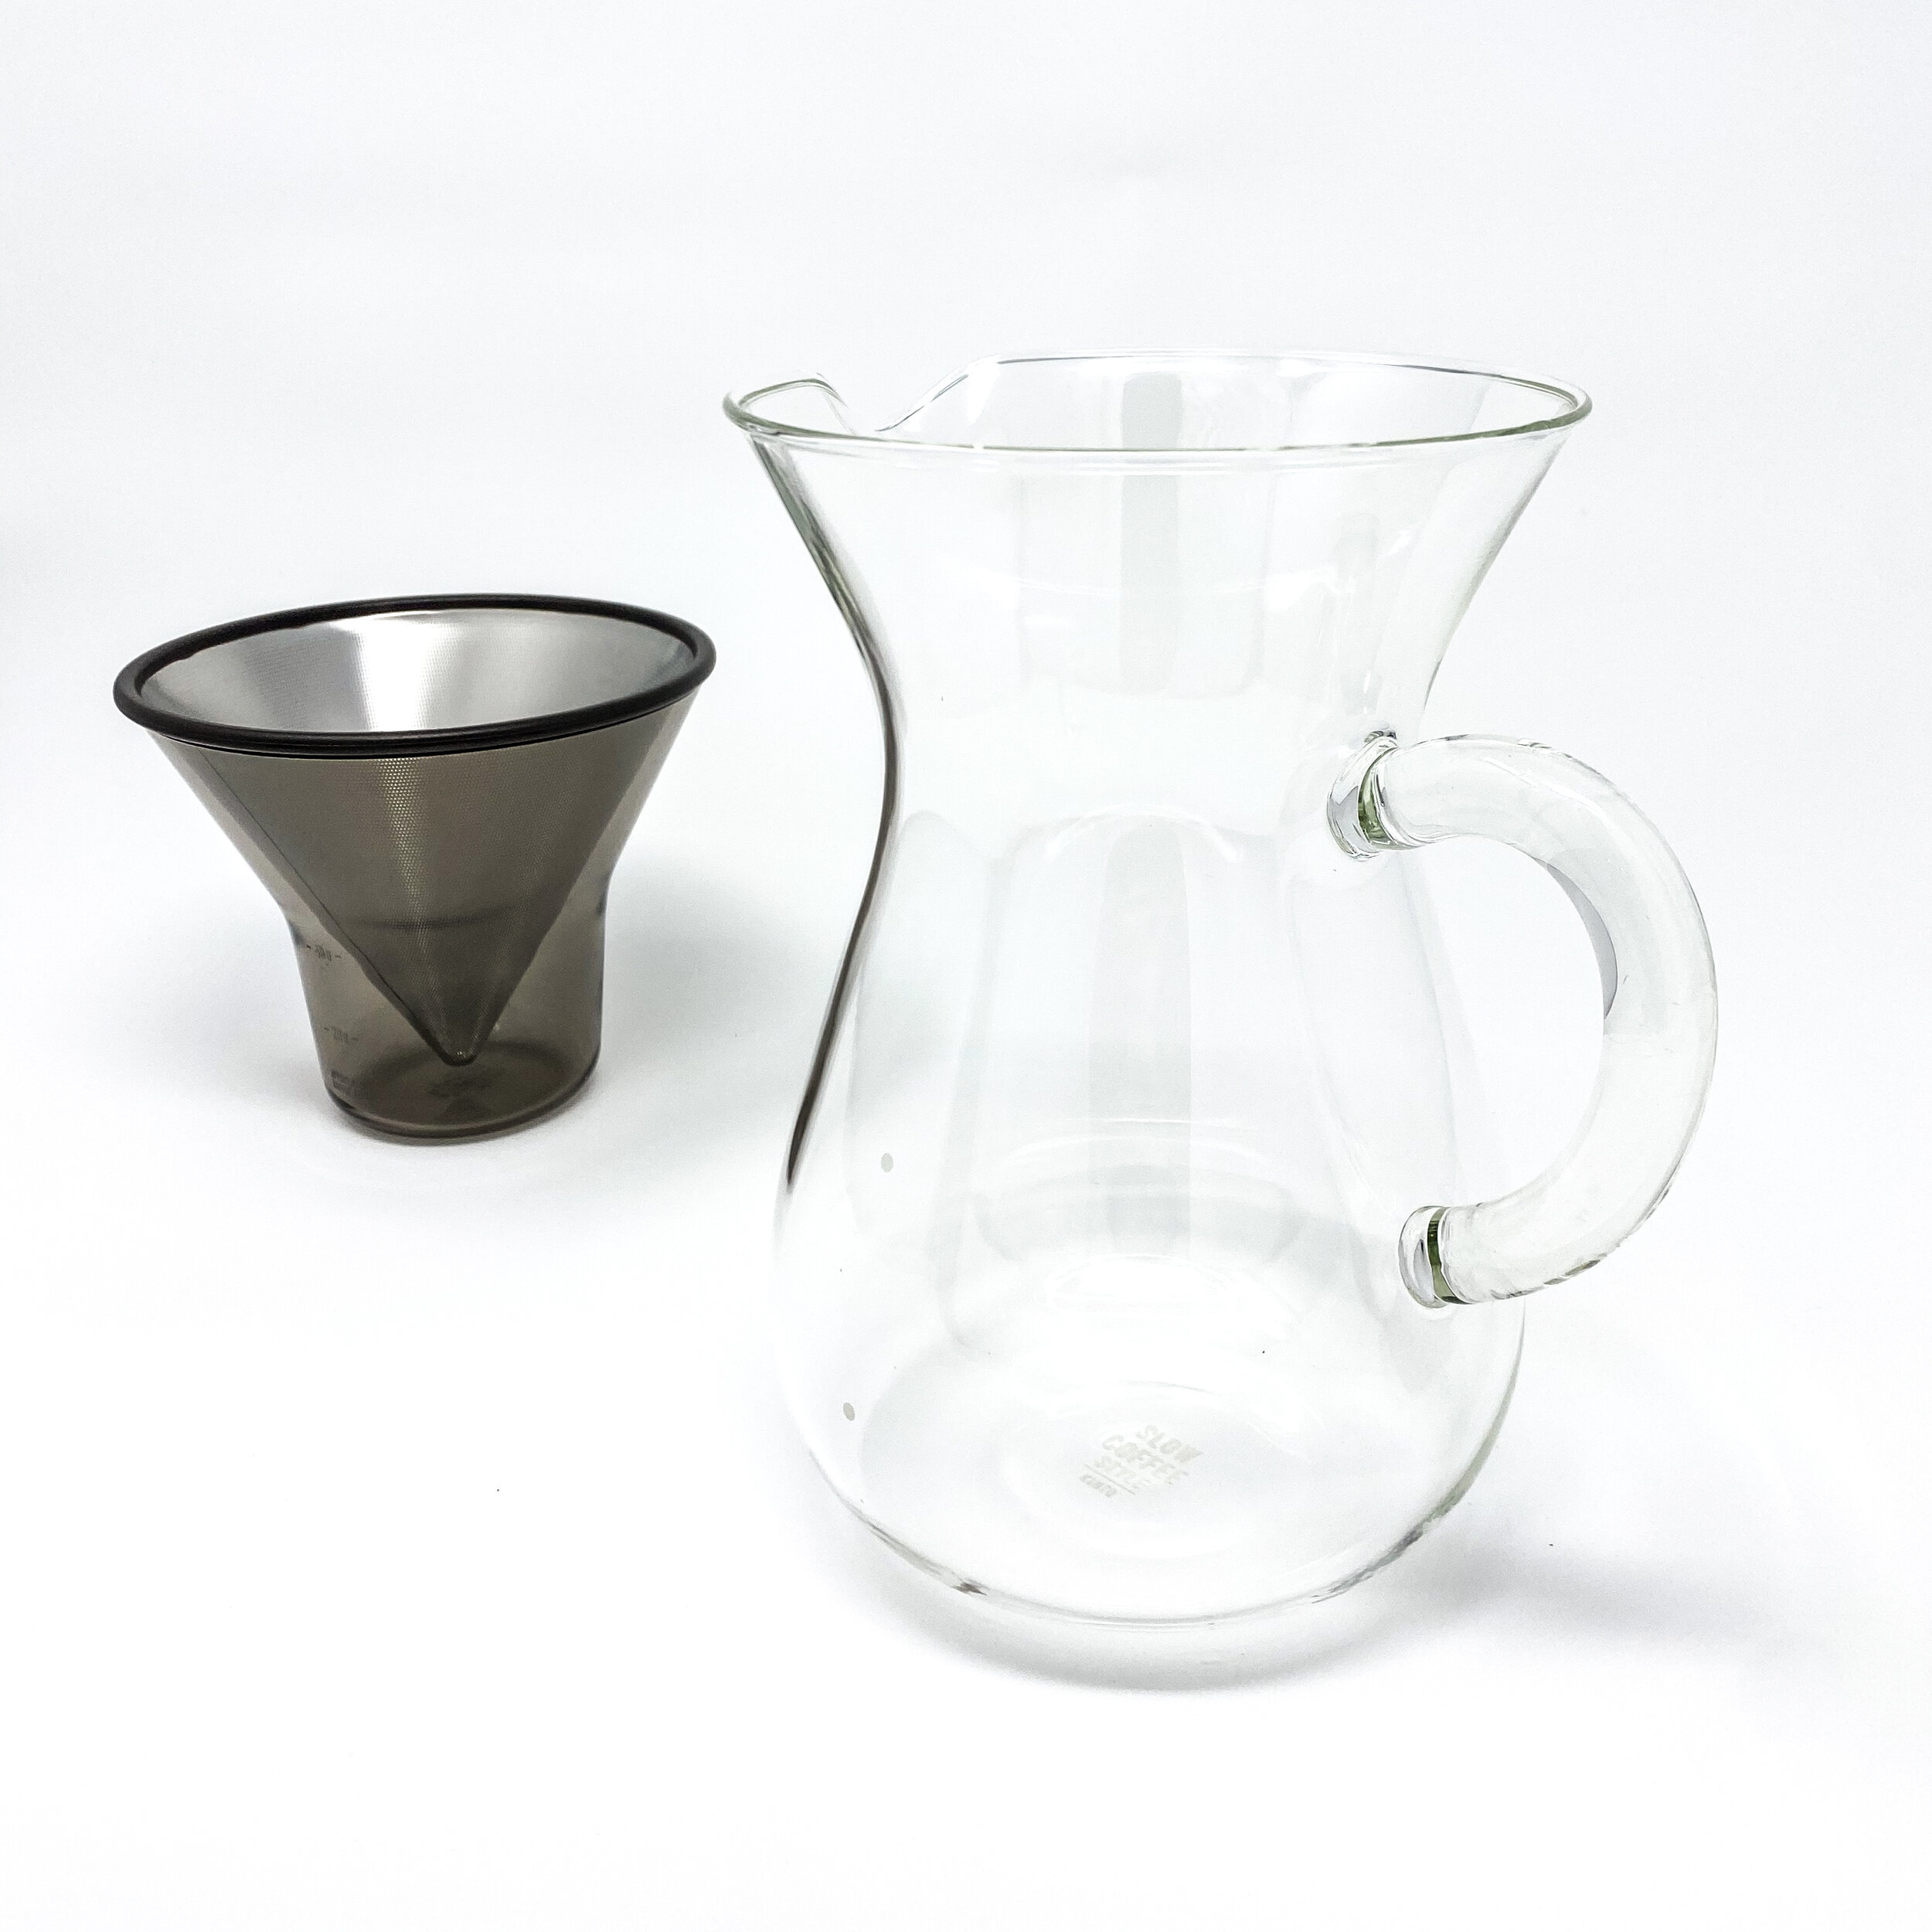 Coffee Carafe with Stainless Brew Basket by Kinto — Lander Coffee